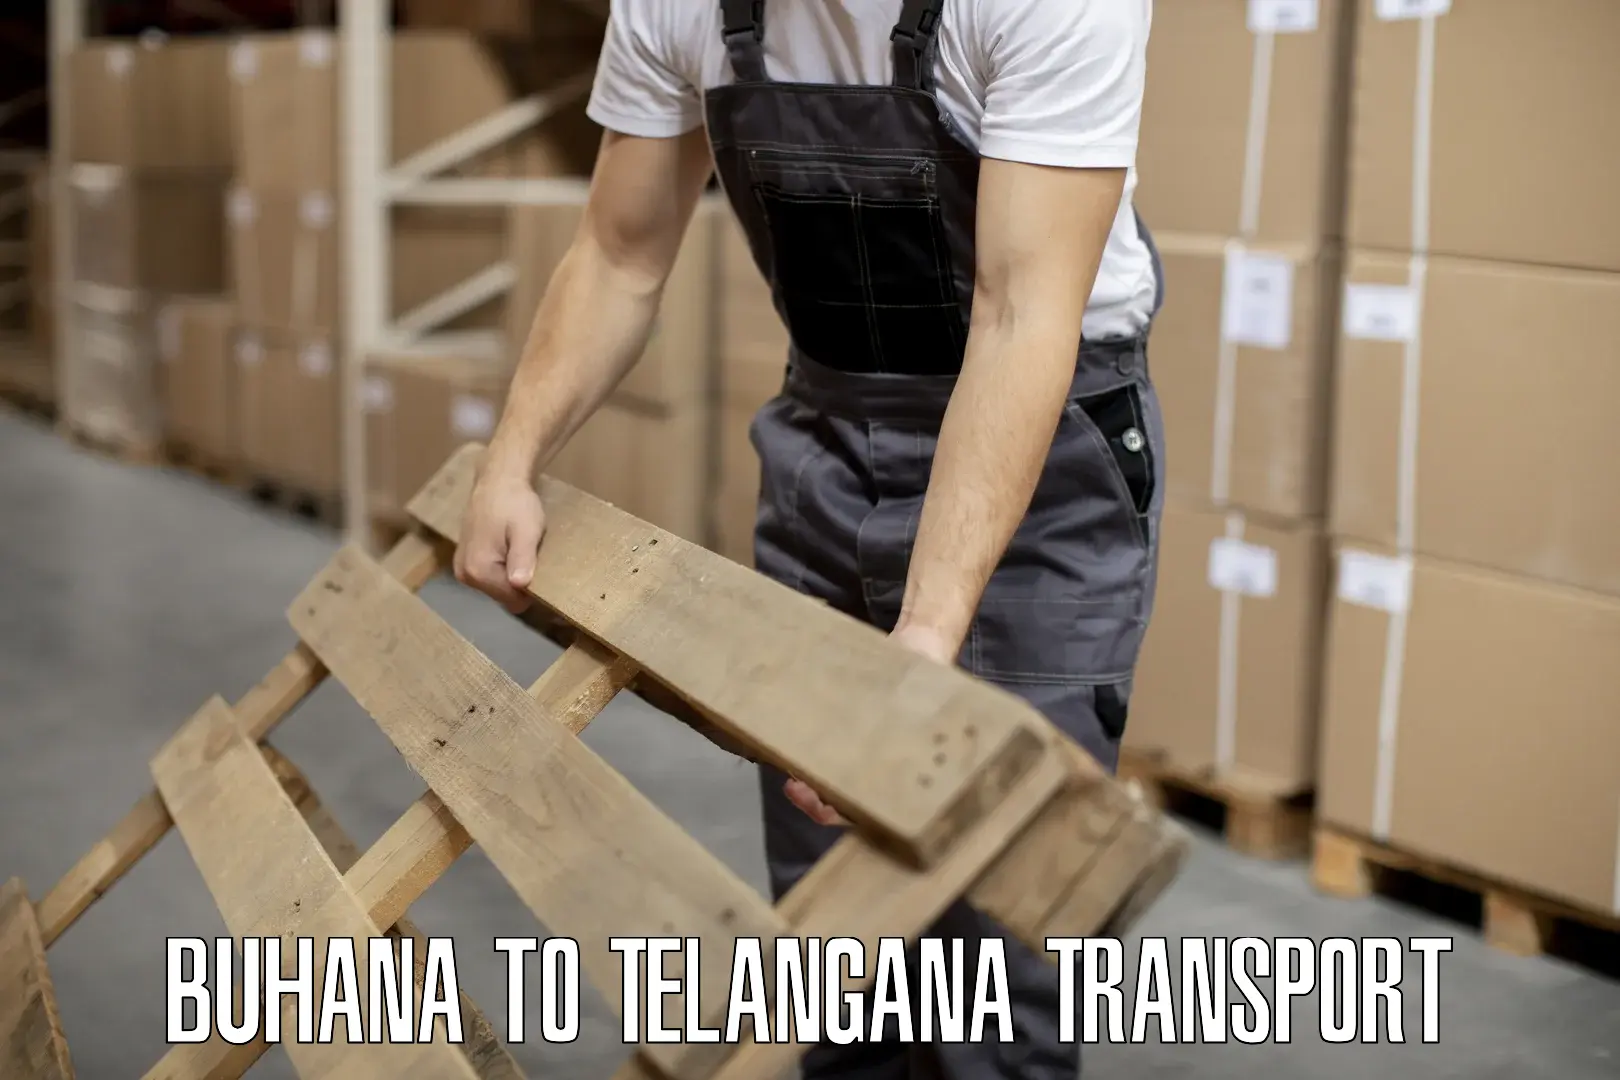 Furniture transport service in Buhana to Mancherial